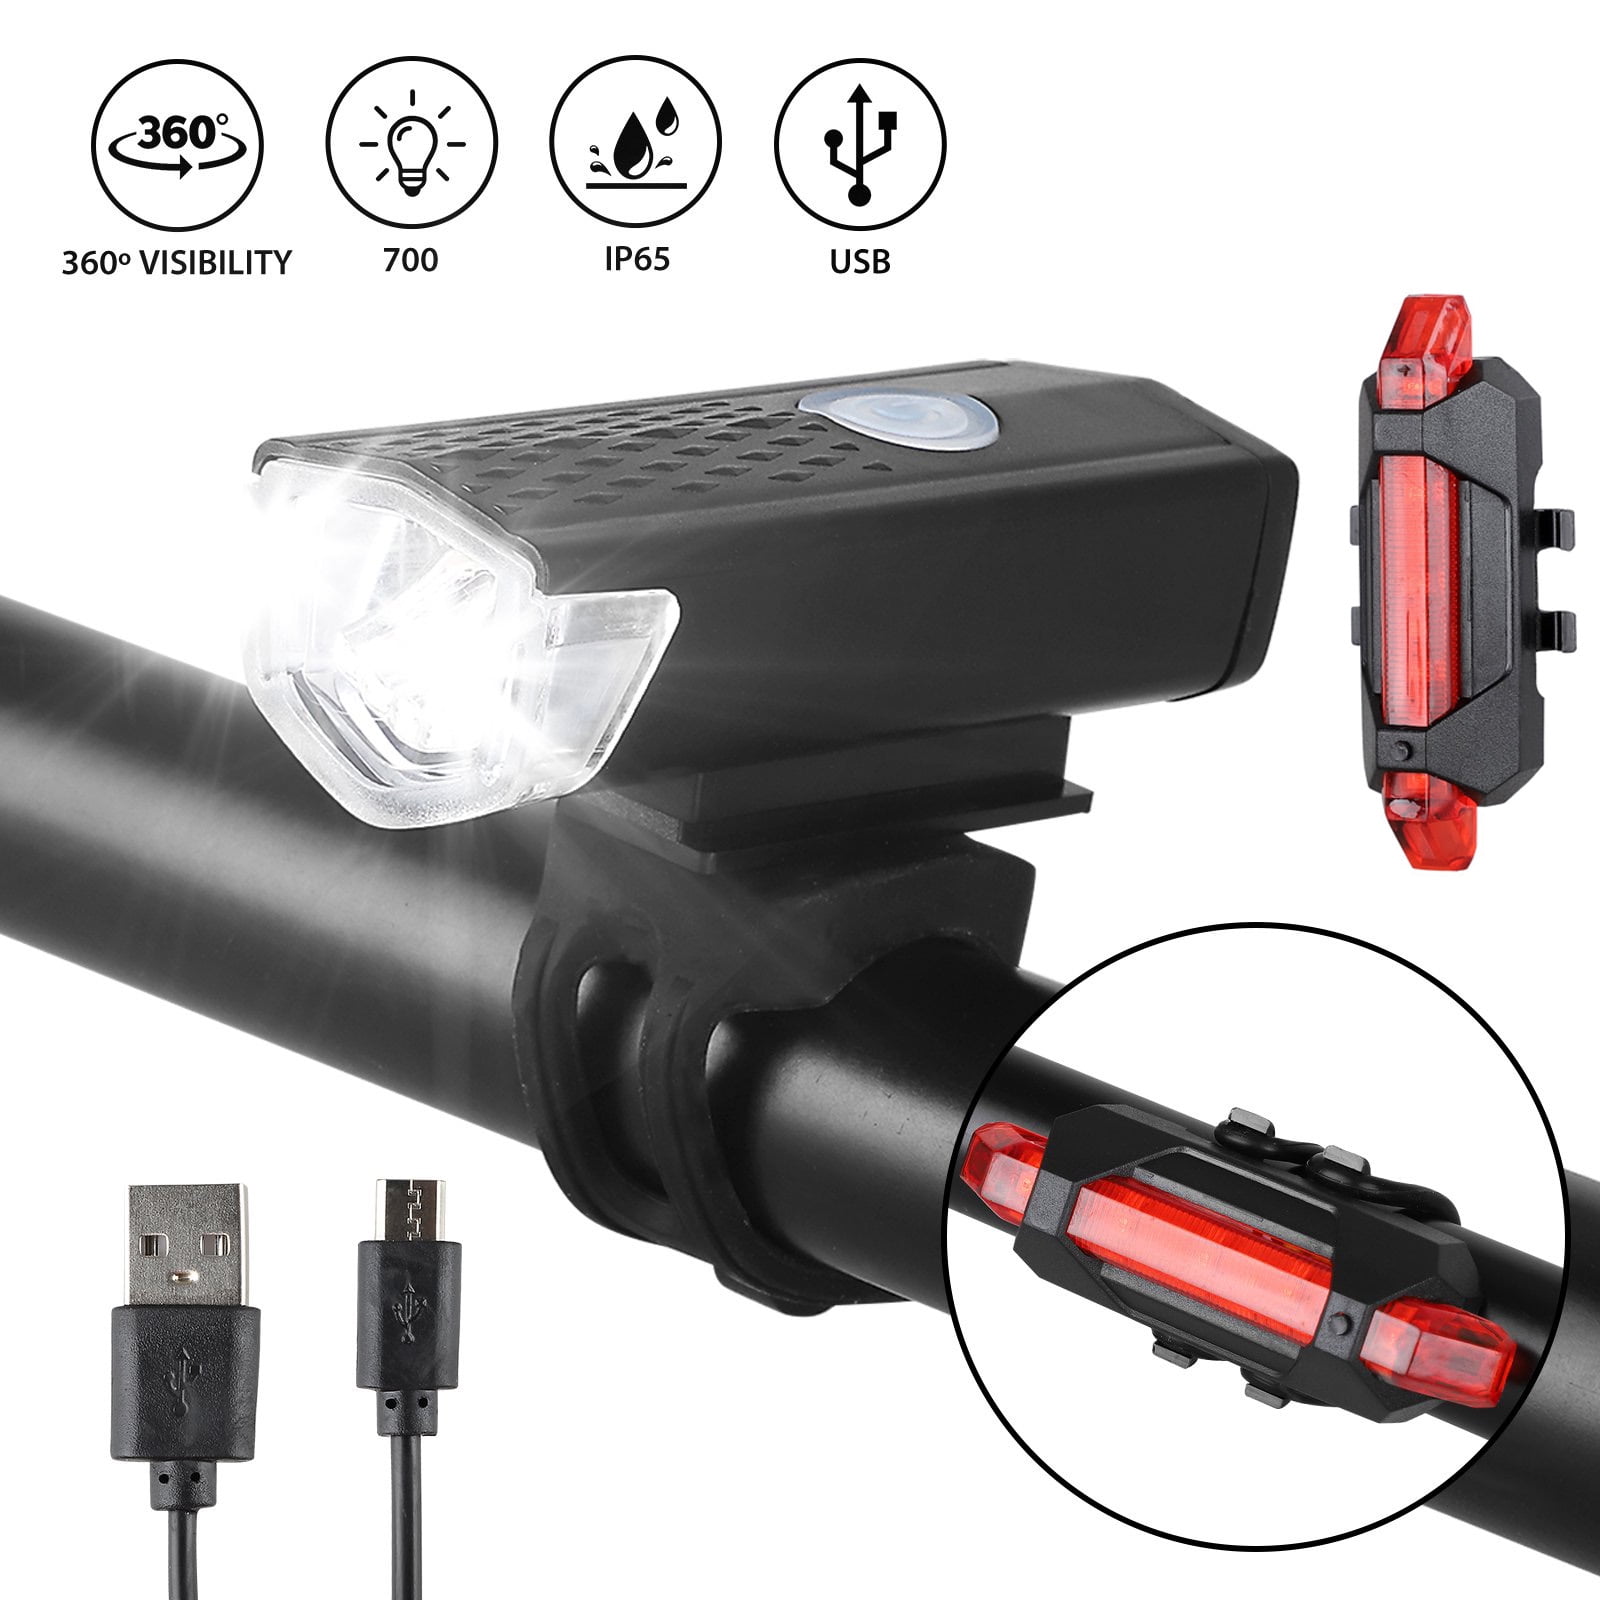 Super Bright Bike Bicycle LED Headlight USB Rechargeable Waterproof Front Torch